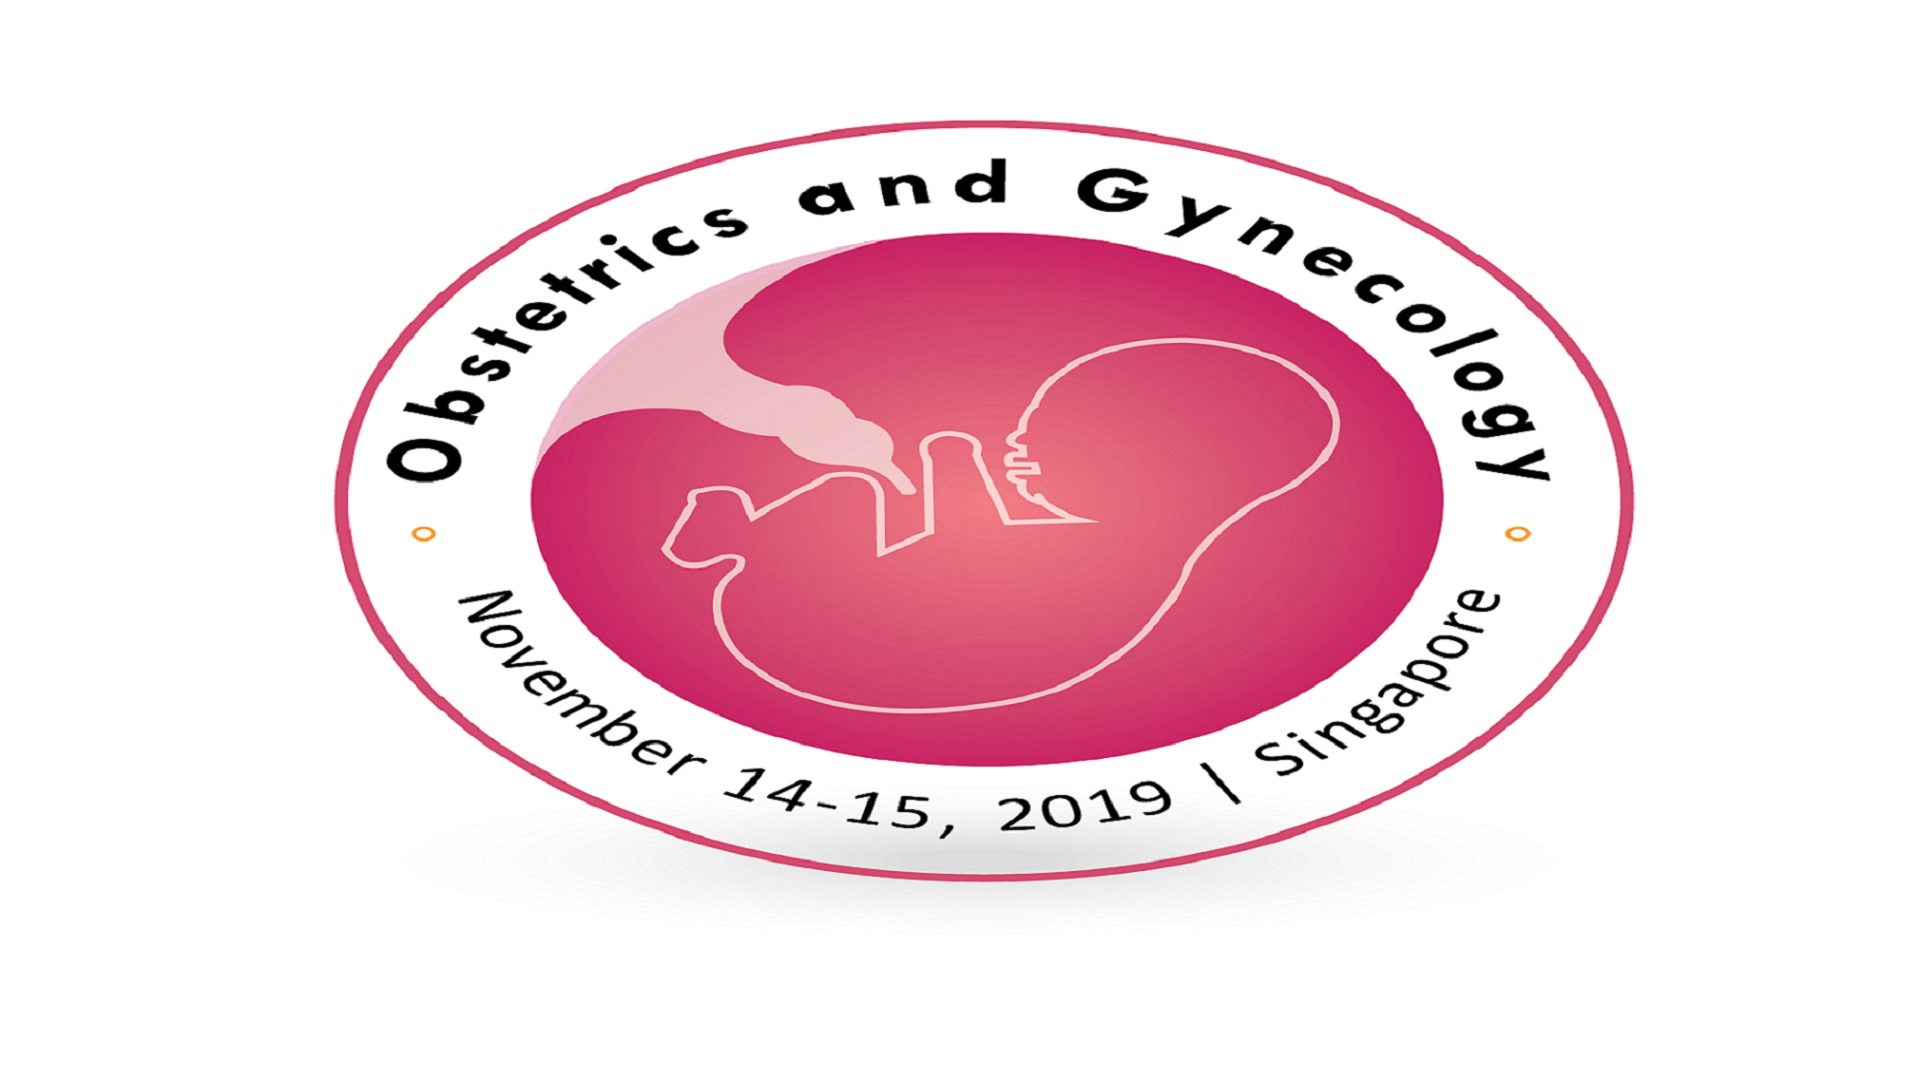 5th International Conference on Obstetrics and Gynecology